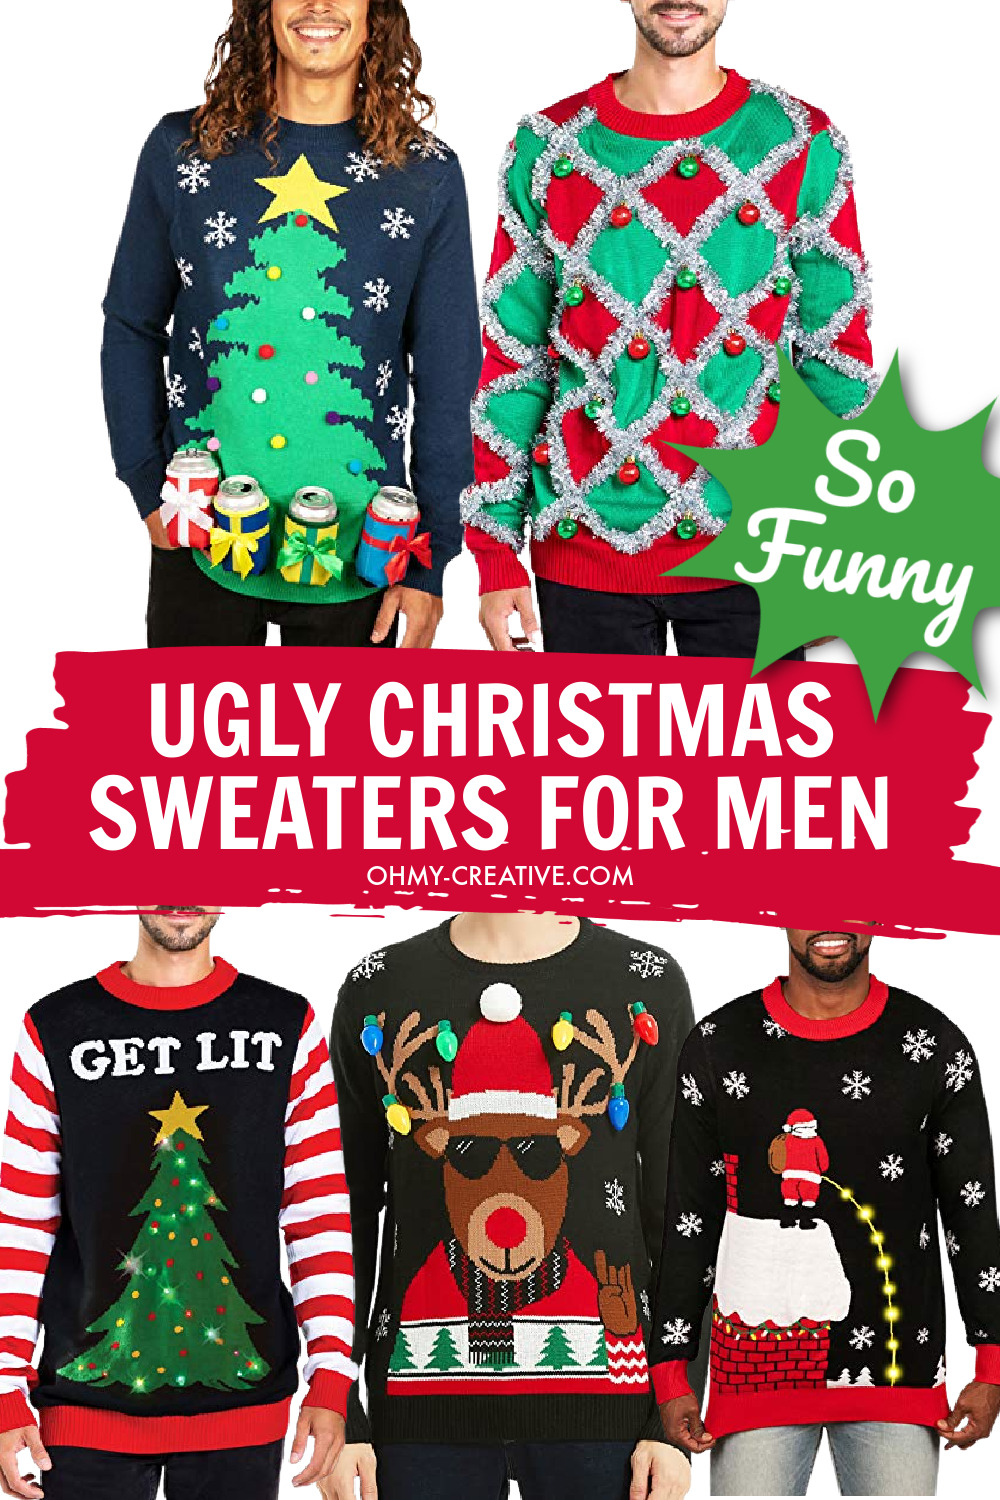 Ugly Christmas Sweaters For Men - Oh My Creative